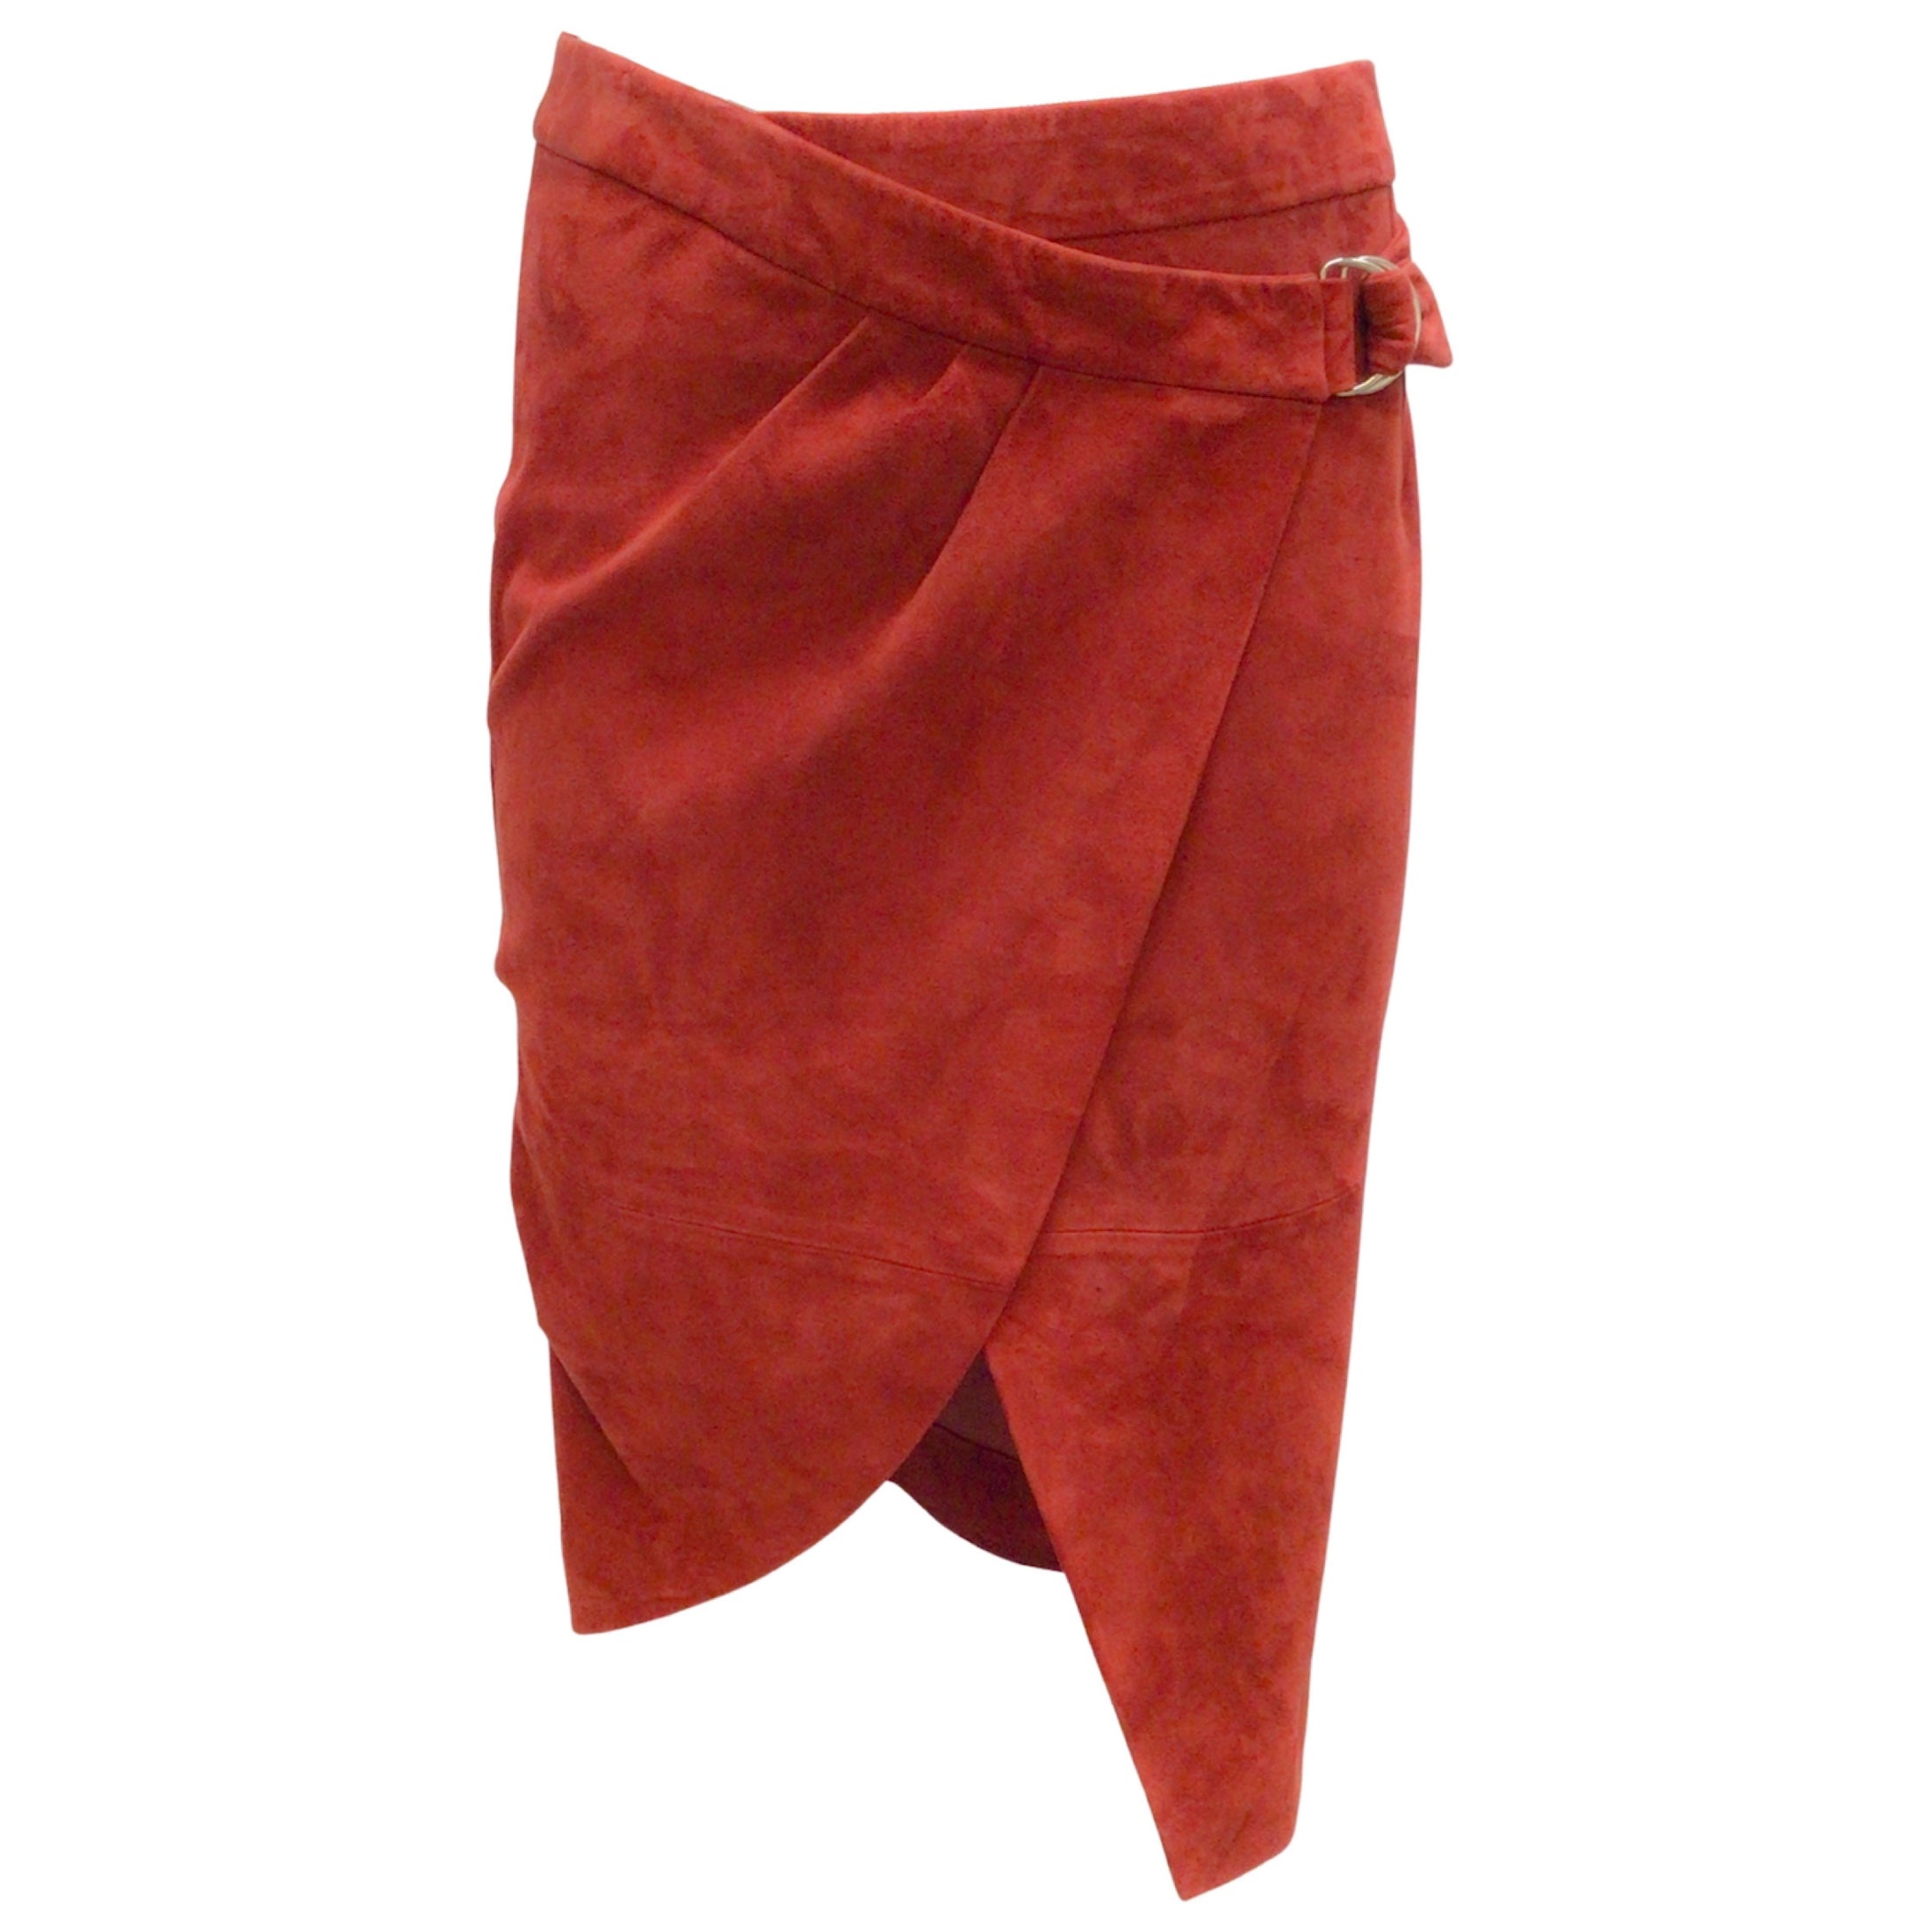 Nour Hammour Berry Red Suede Leather Wrap Skirt